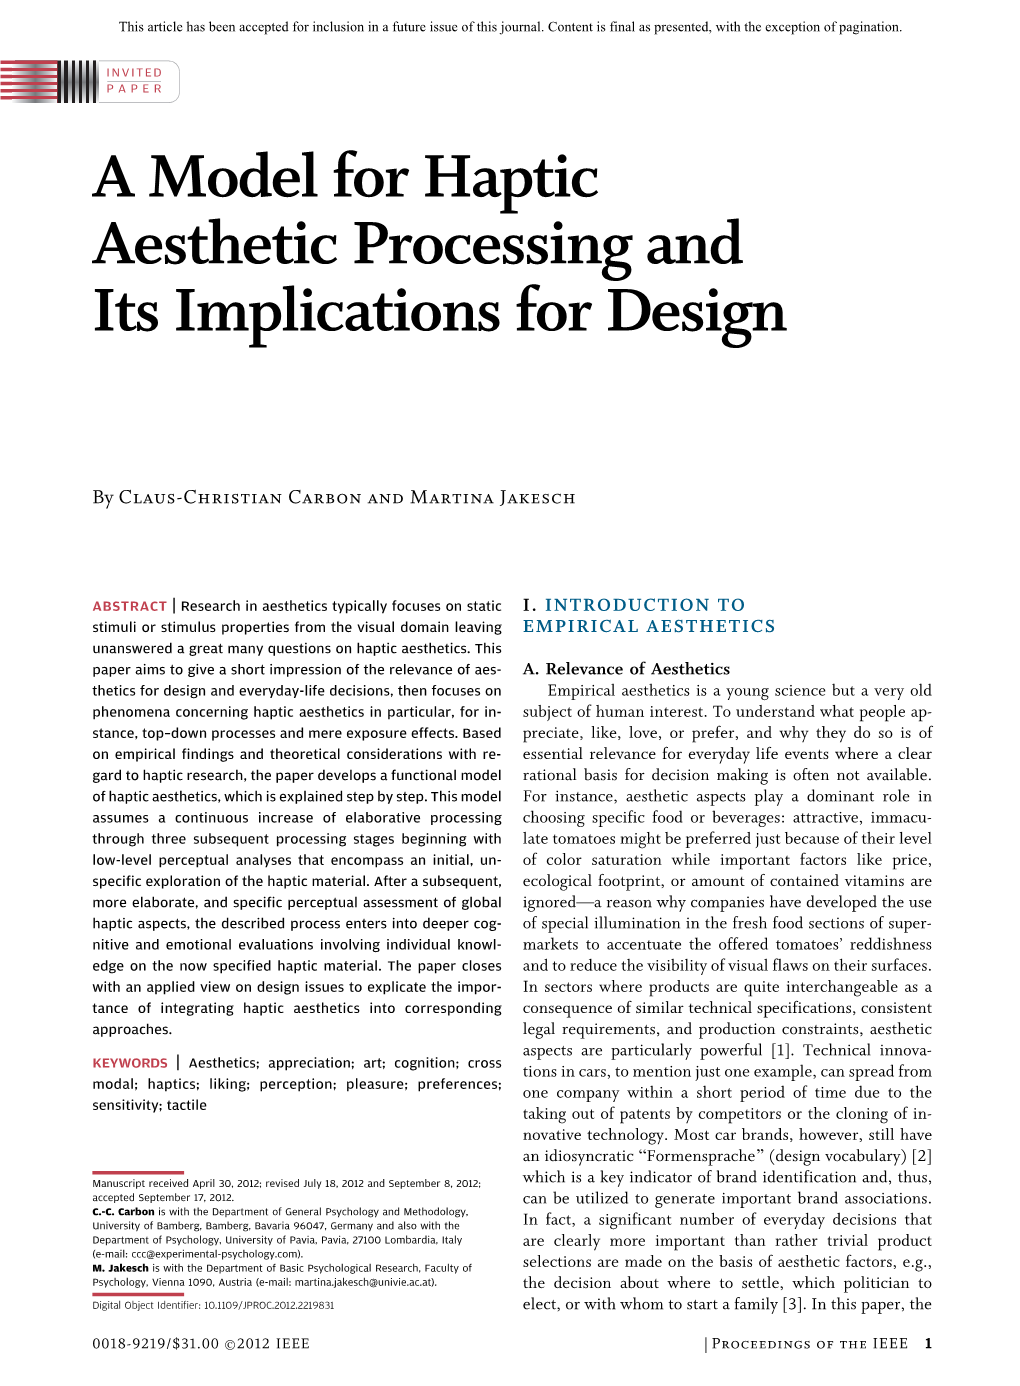 A Model for Haptic Aesthetic Processing and Its Implications for Design